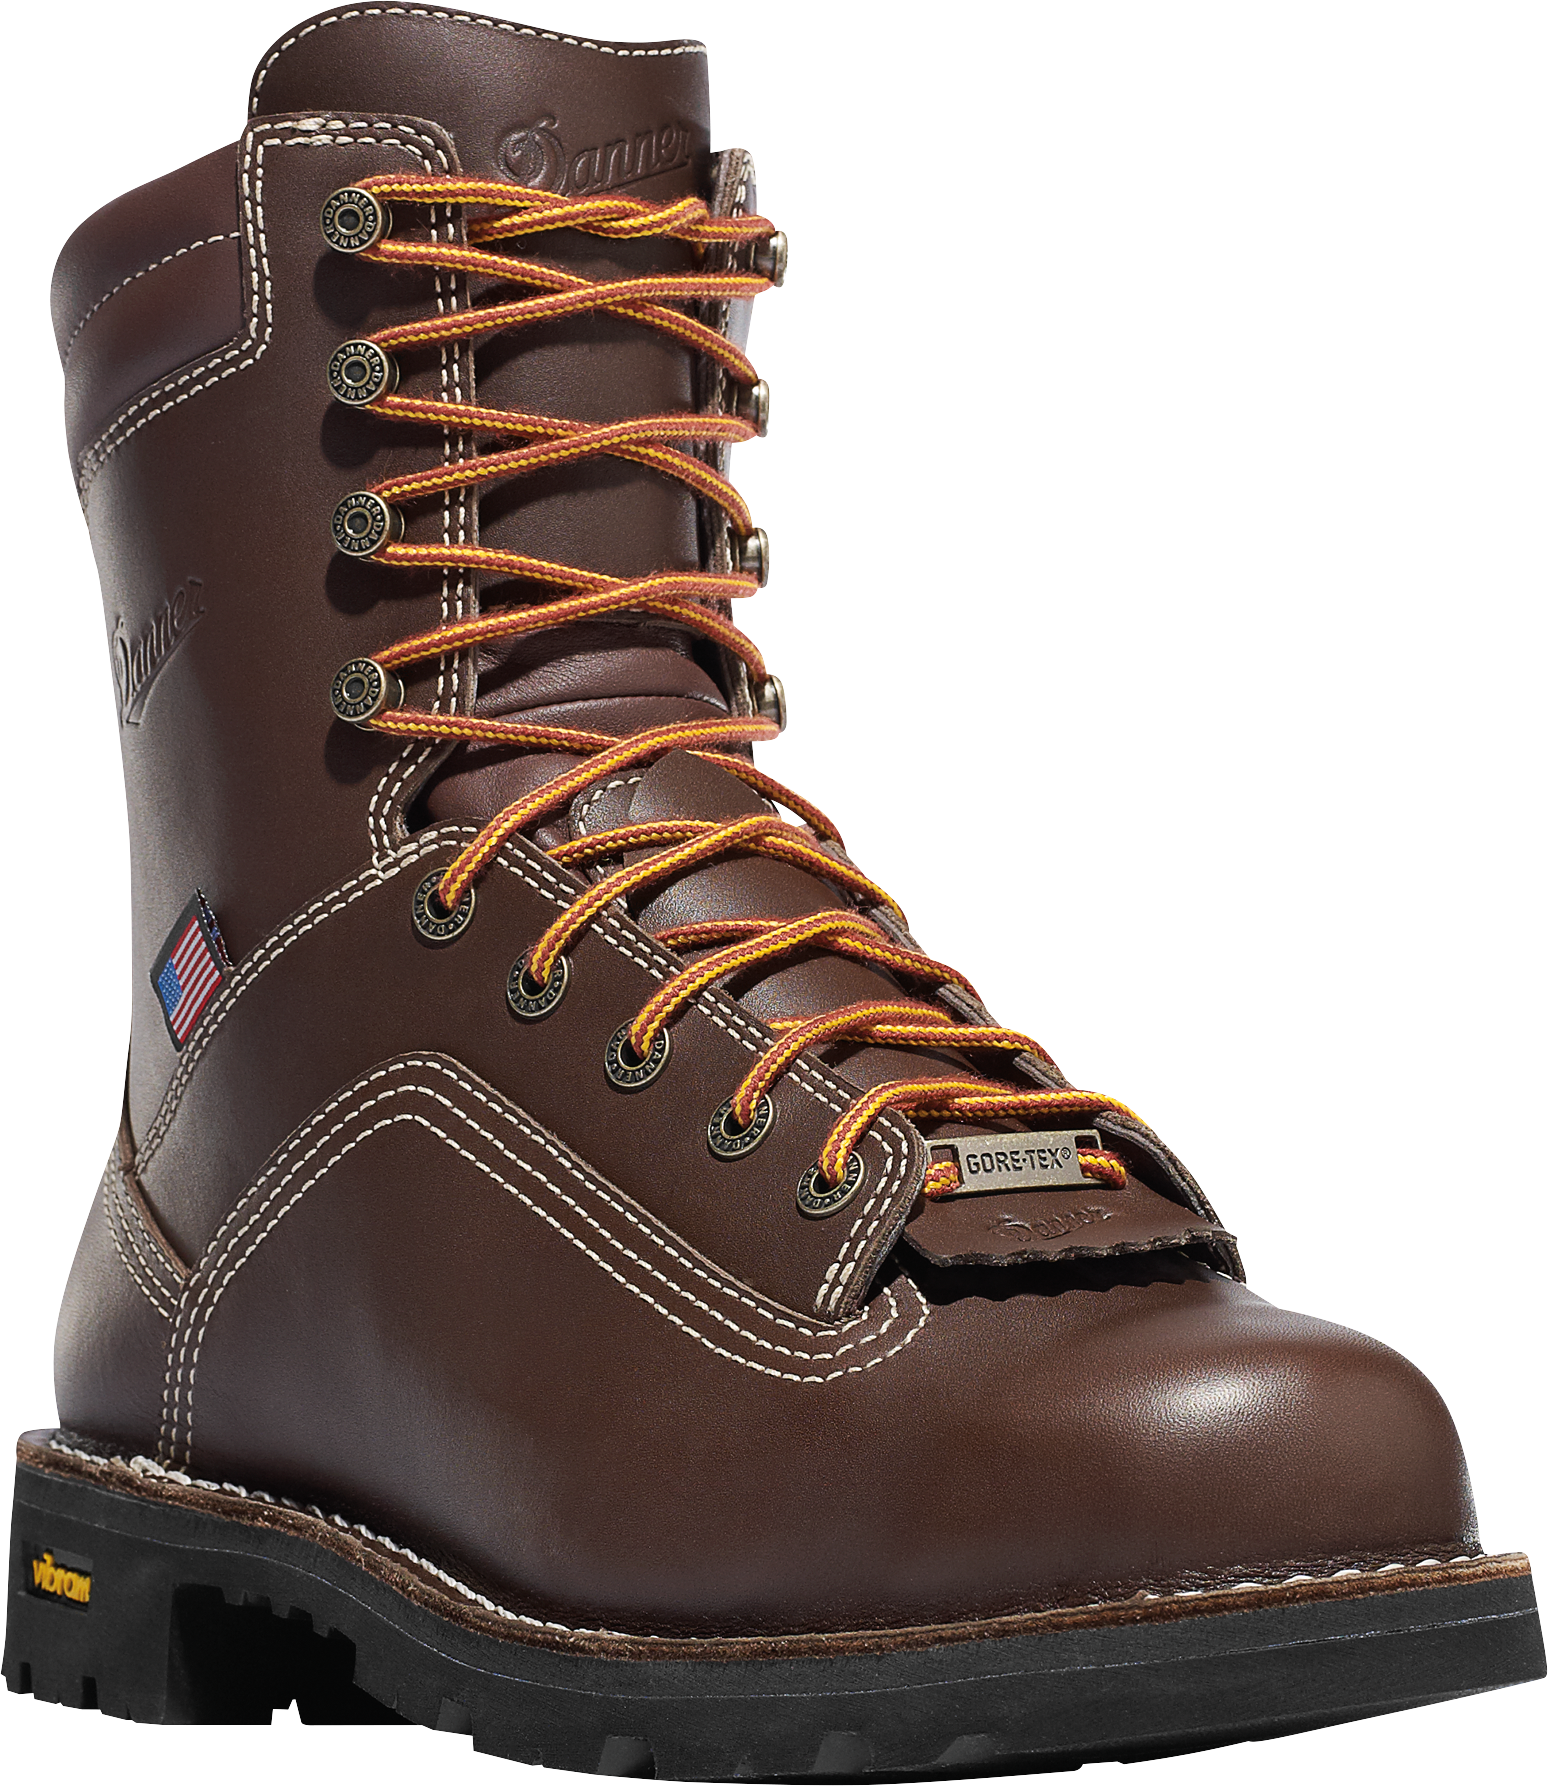 Danner Quarry USA GORE-TEX Work Boots for Men - Brown - 8.5W